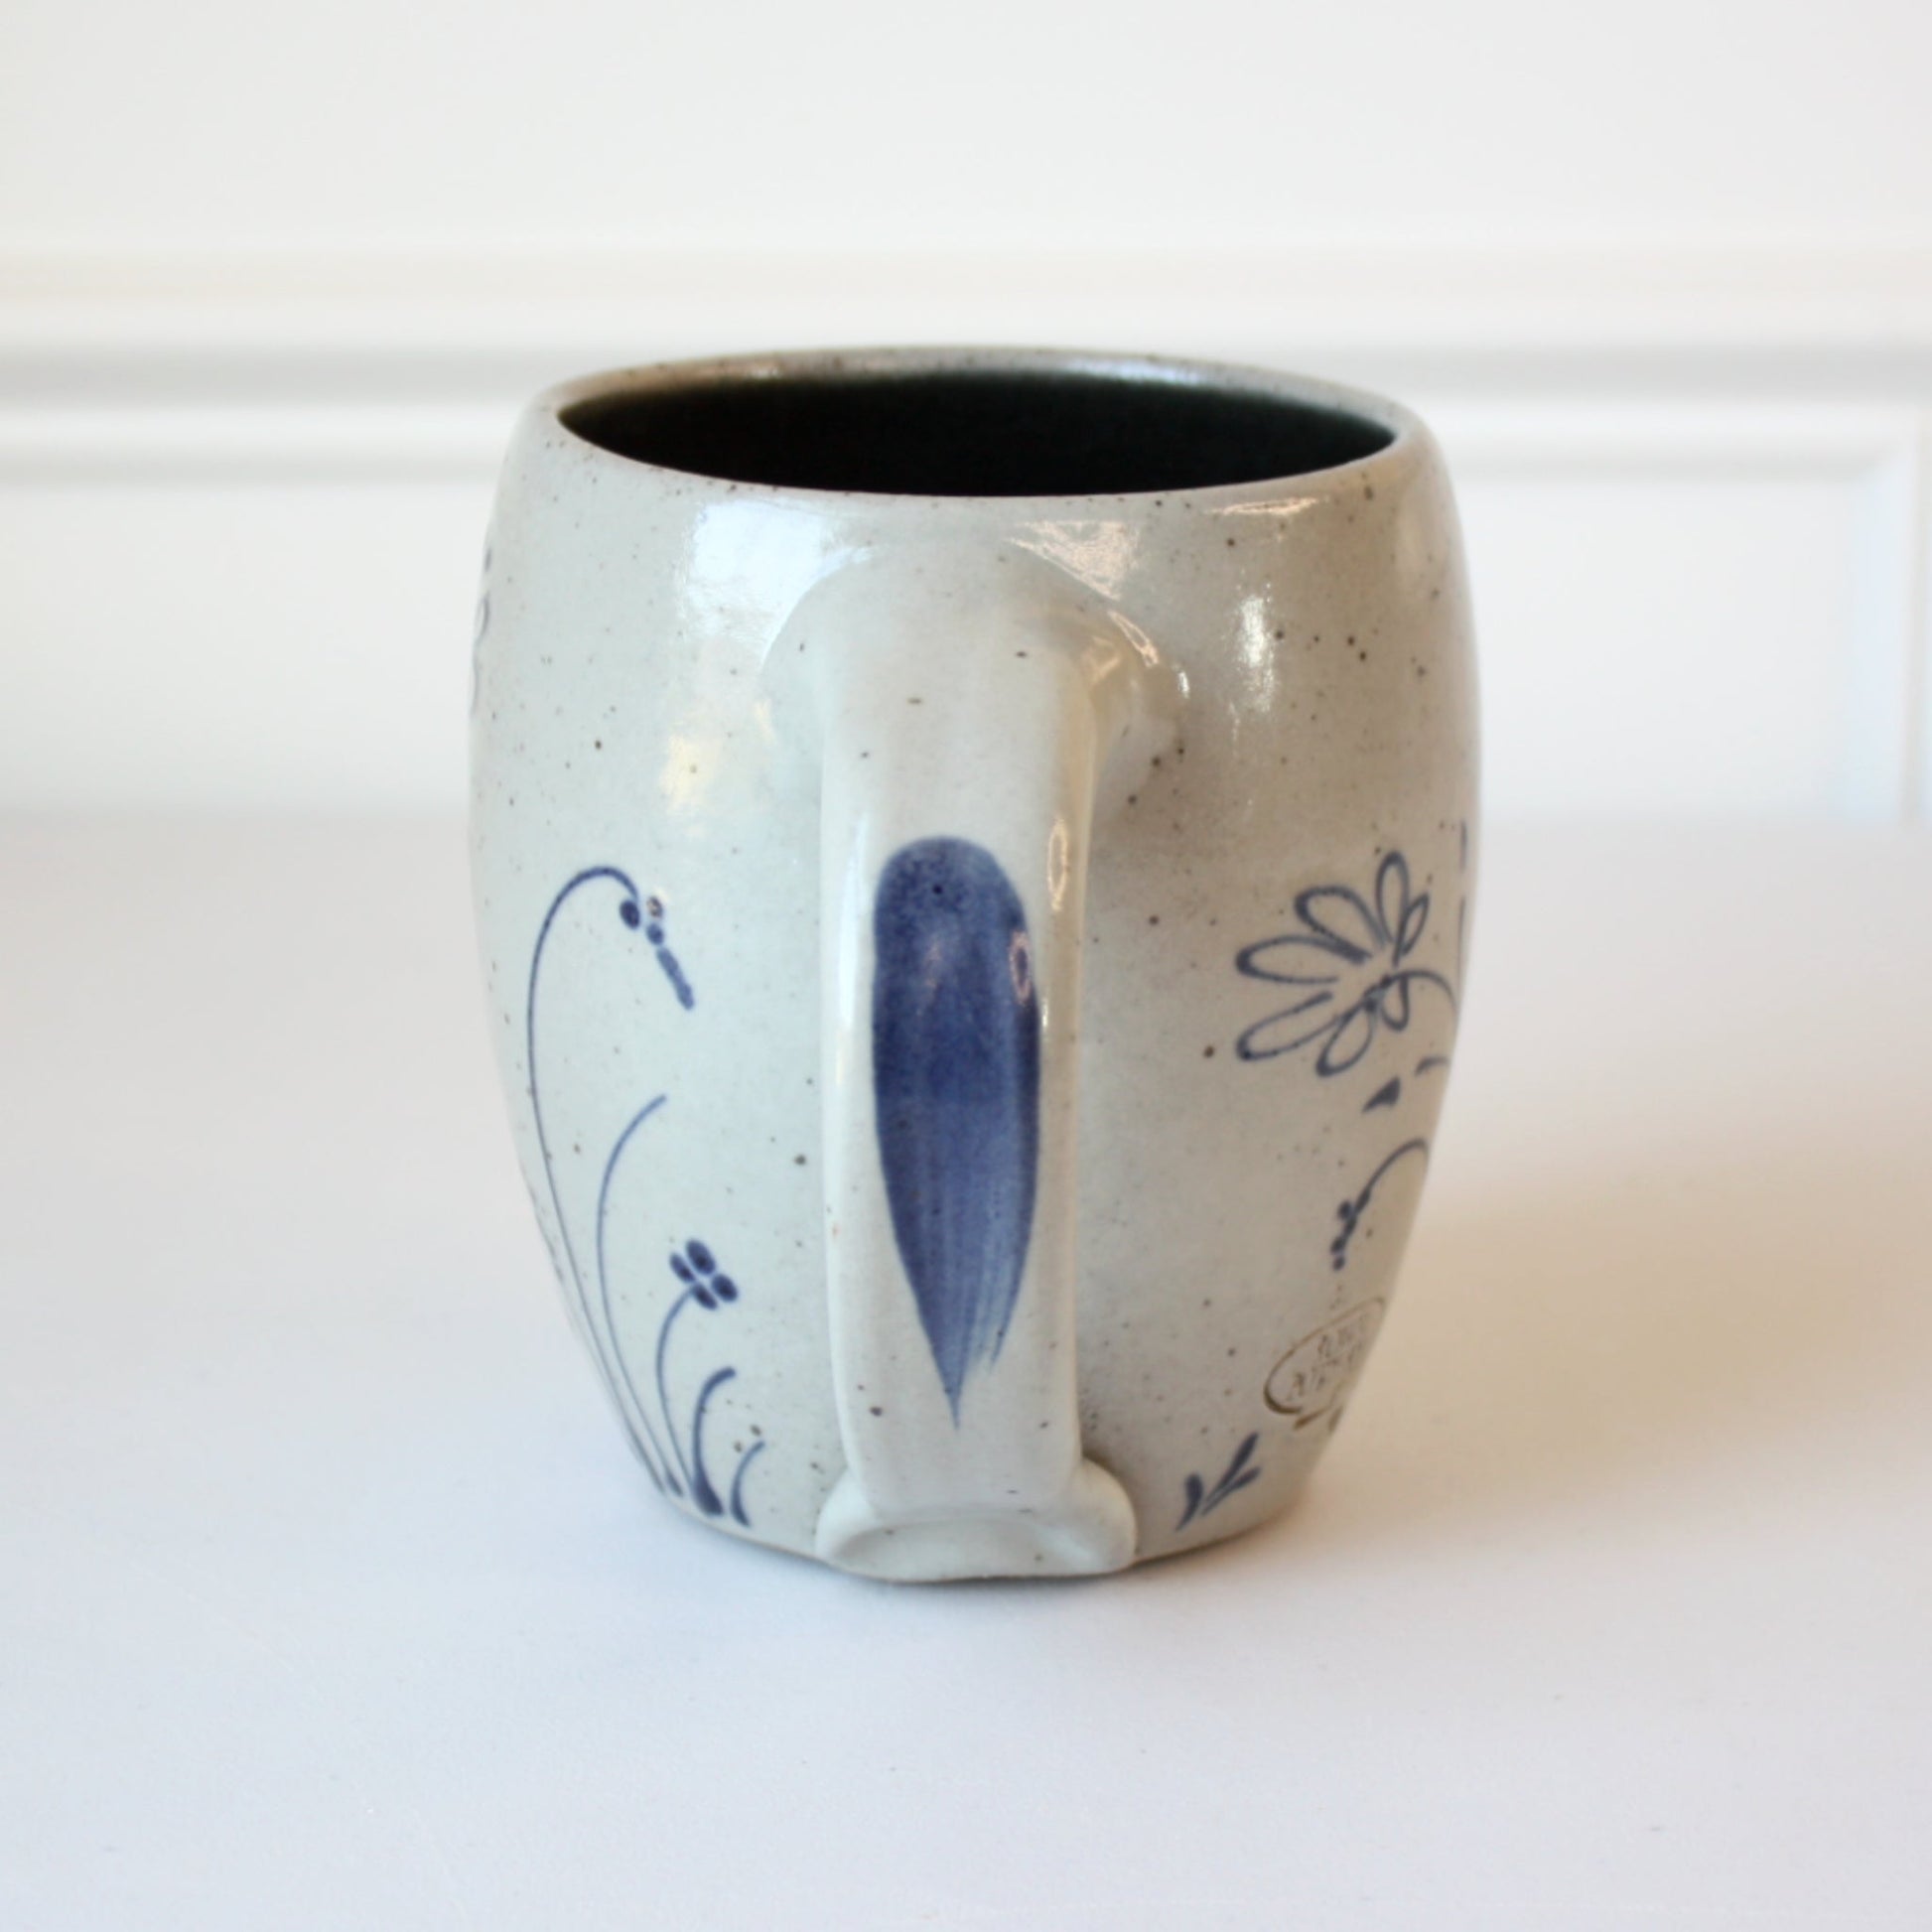 Wildflower Hand Painted Pottery Mug - Made in the USA